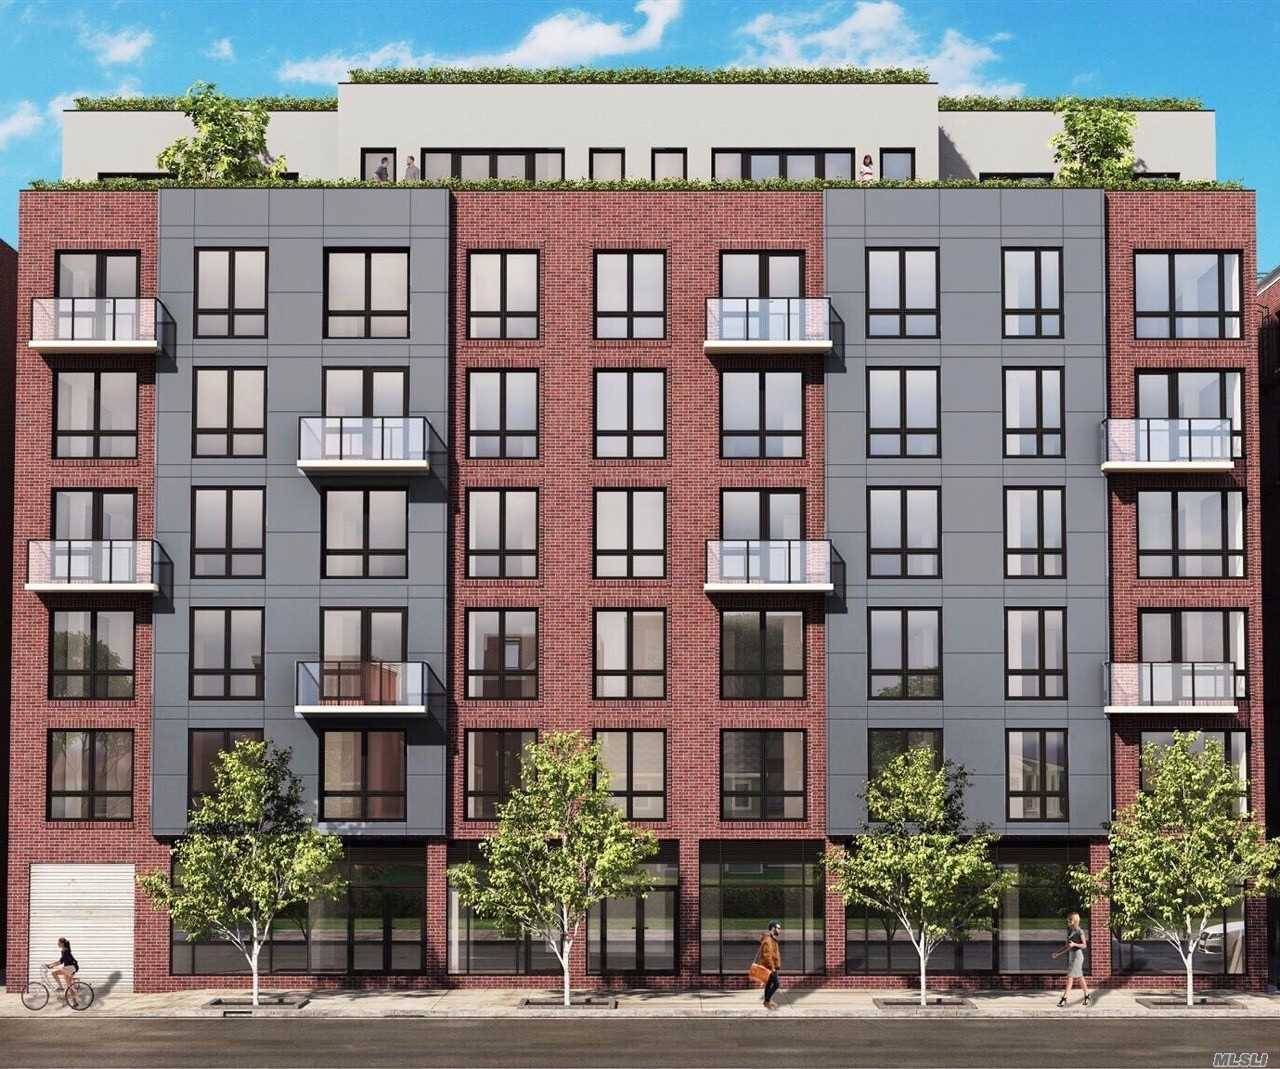 We Are Proud To Introduce A New Condominium Development, The Sunrise, Located In The Heart Of Historic Forest Hills.